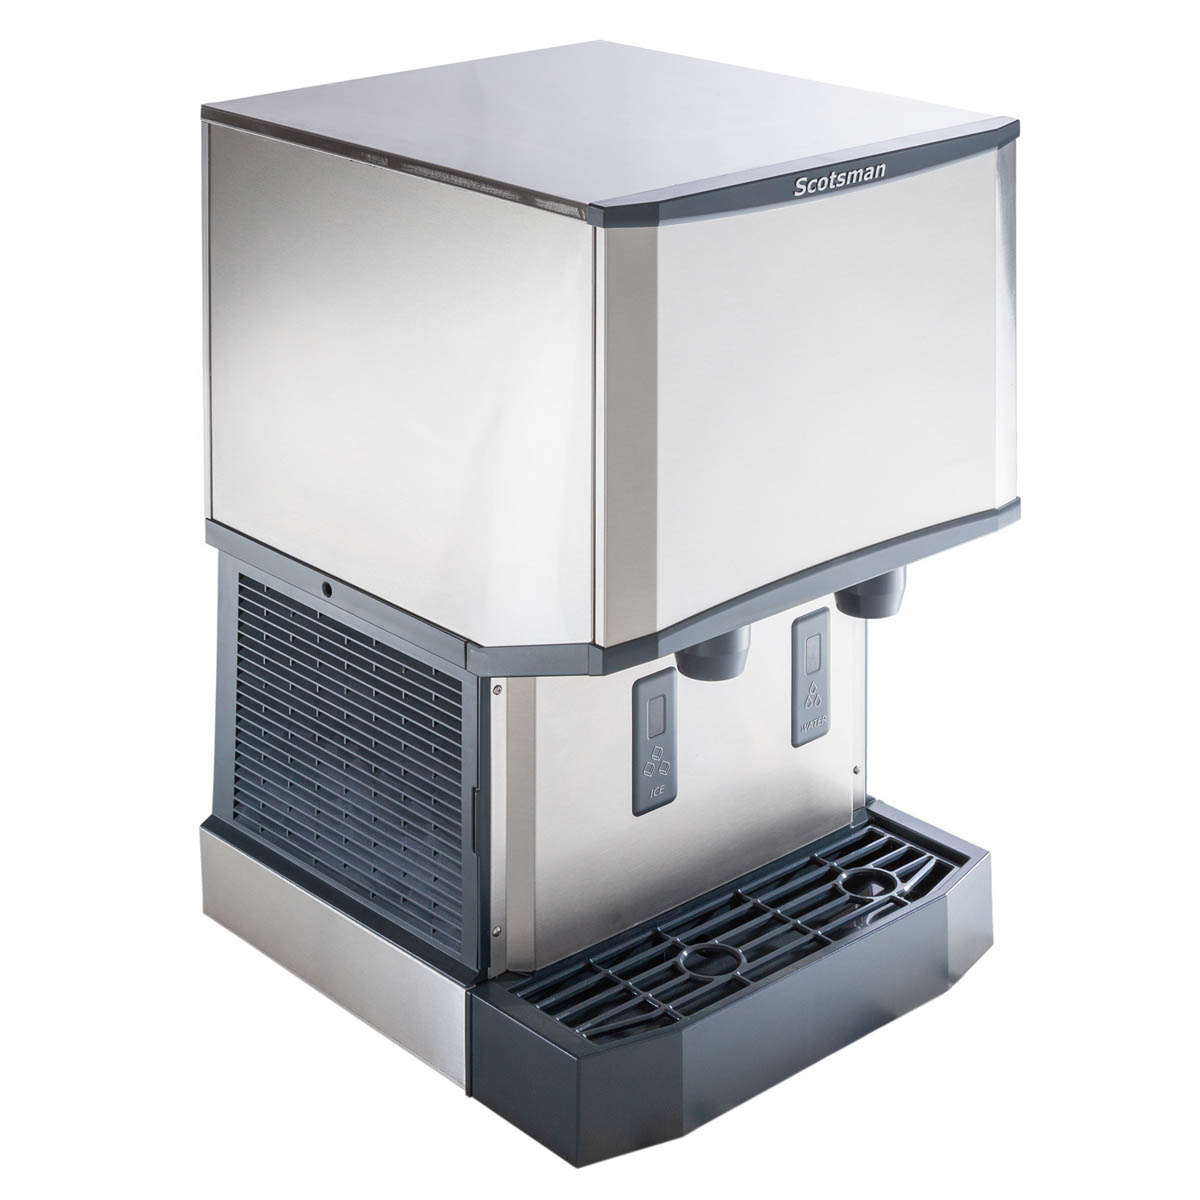 With Scotsman HID525AW-1 Easy to Serve Ice For Your Customers, Chef's Deal